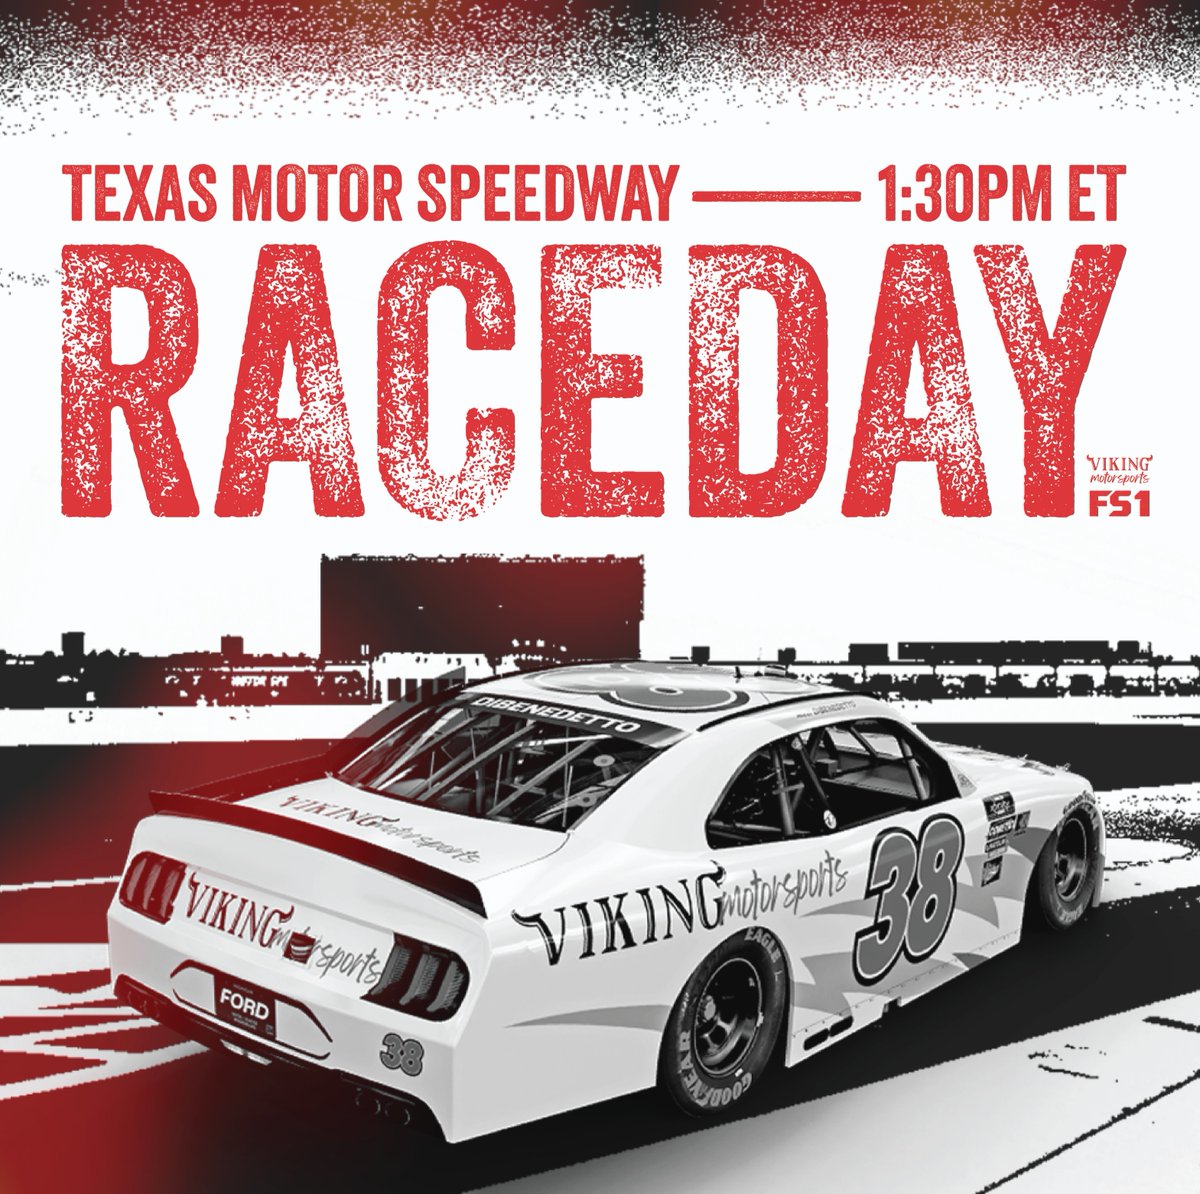 It's race day here at Texas Motor Speedway and we're pumped for the Andy's Frozen Custard 300! Who's joining us for the action? 🏁🔥 #AndysFrozenCustard300 #NASCAR #Xfinityseries #VikingMotorsports #fordperformance